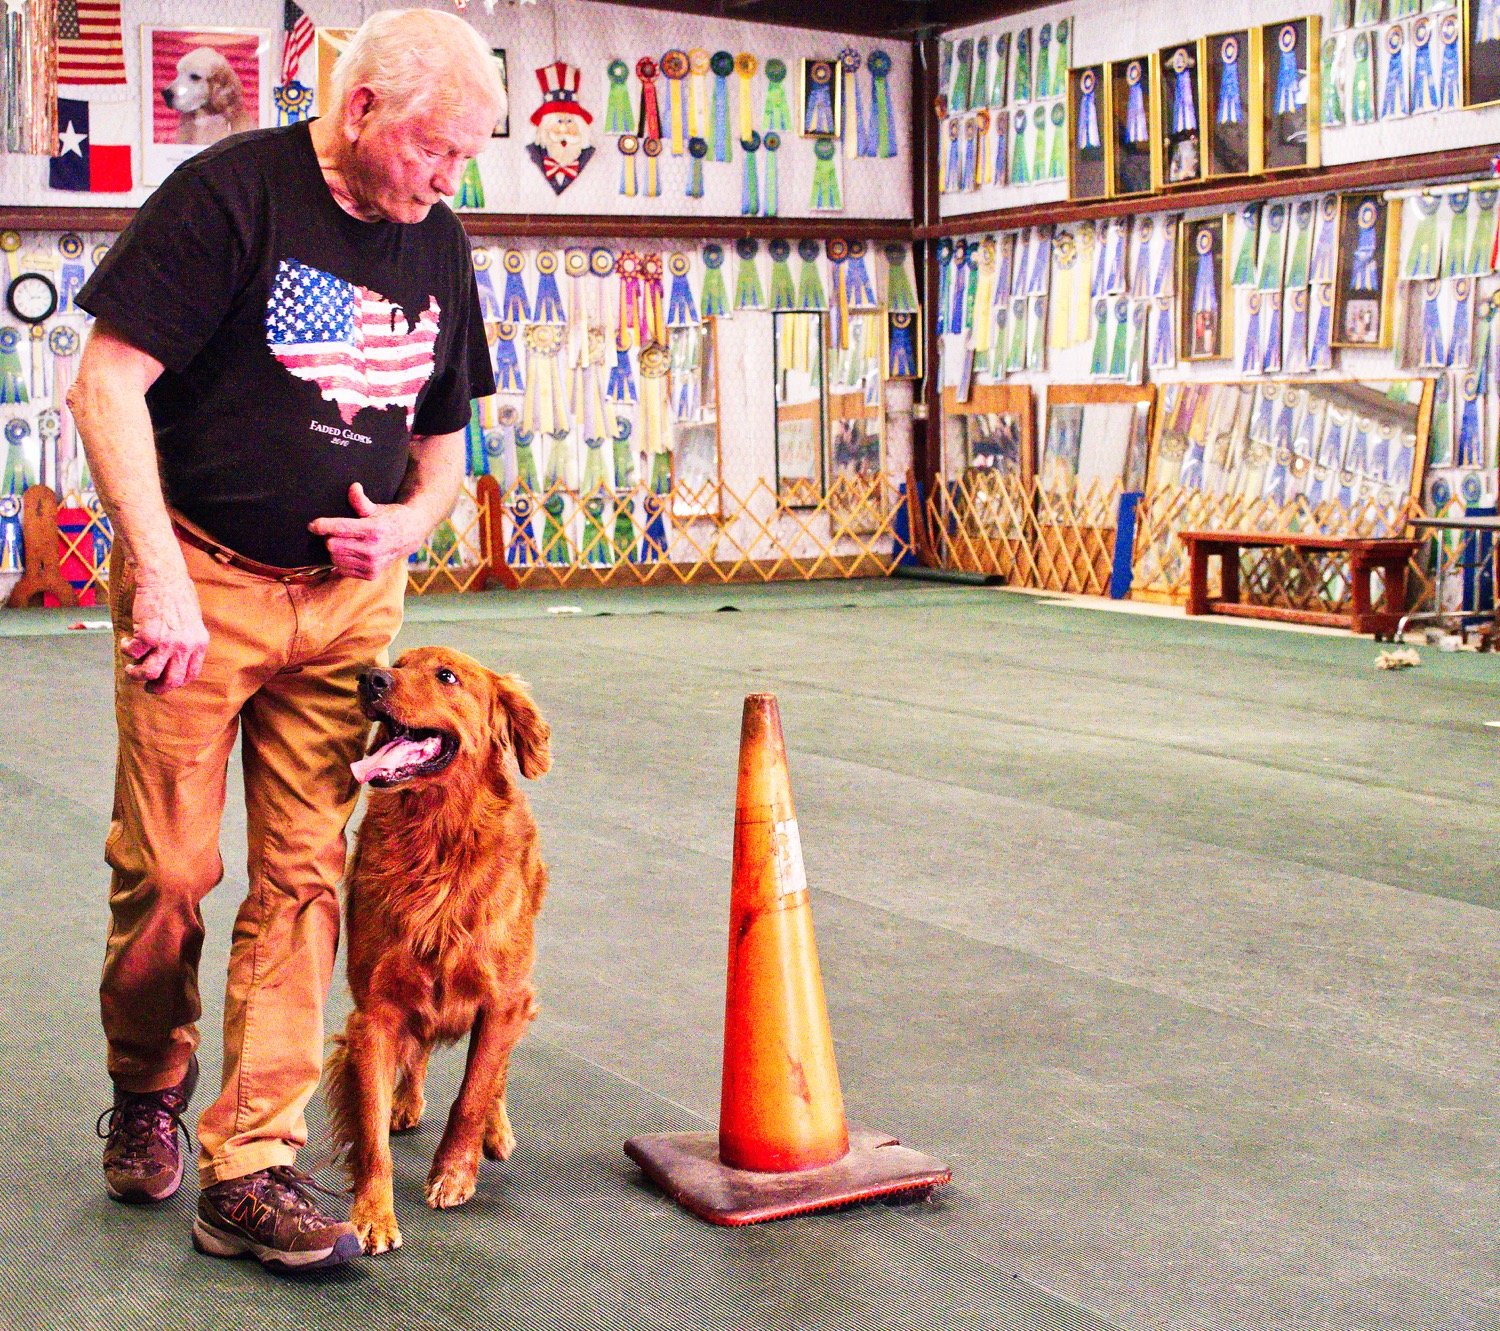 Dave and Trap demonstrate a figure eight pattern, one of the required skills for their obedience competitions. [take paws to enjoy full photos, score prints]